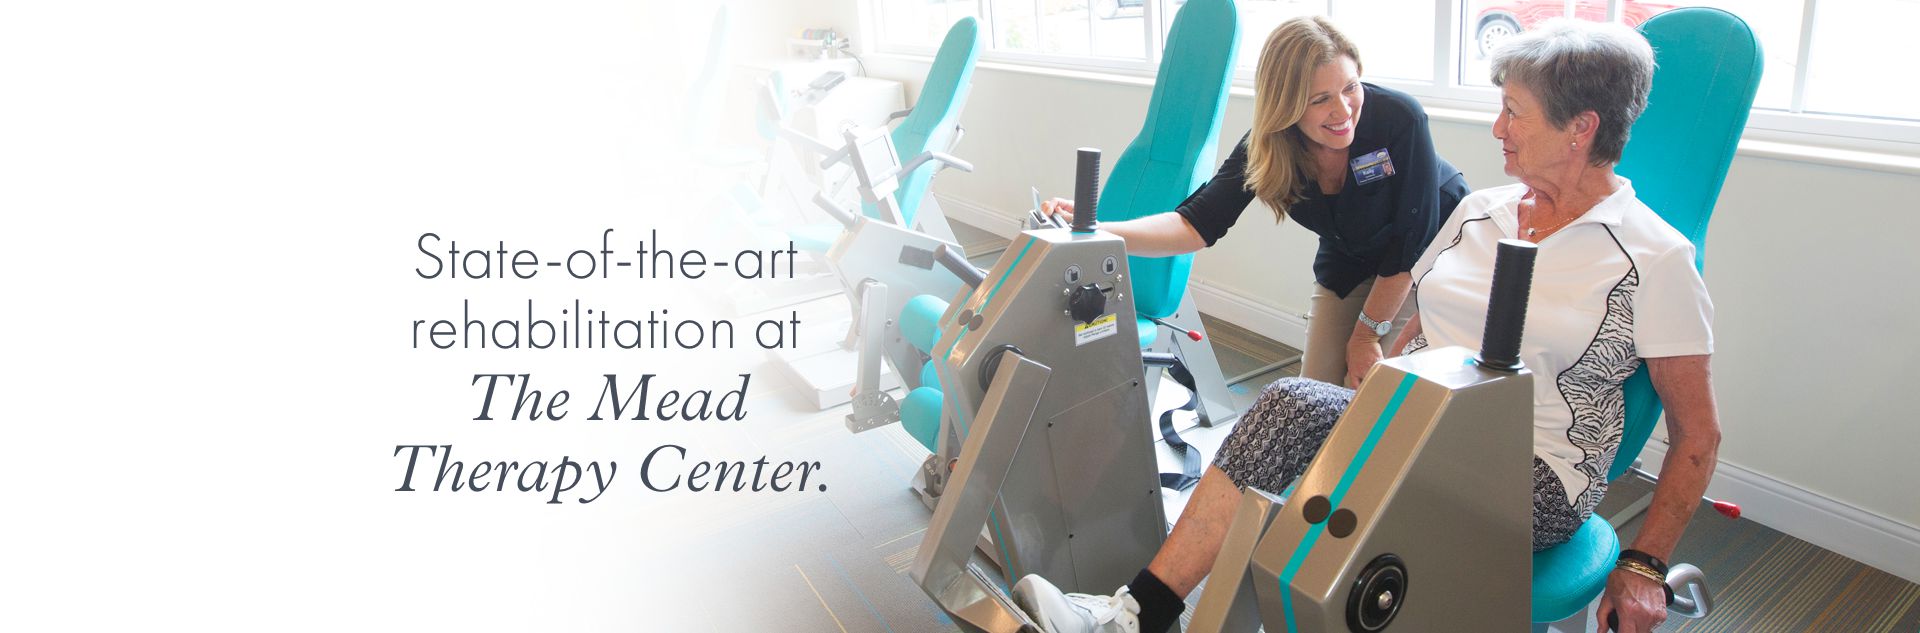 State-of-the-art rehabilitation at  The Mead Therapy Center.